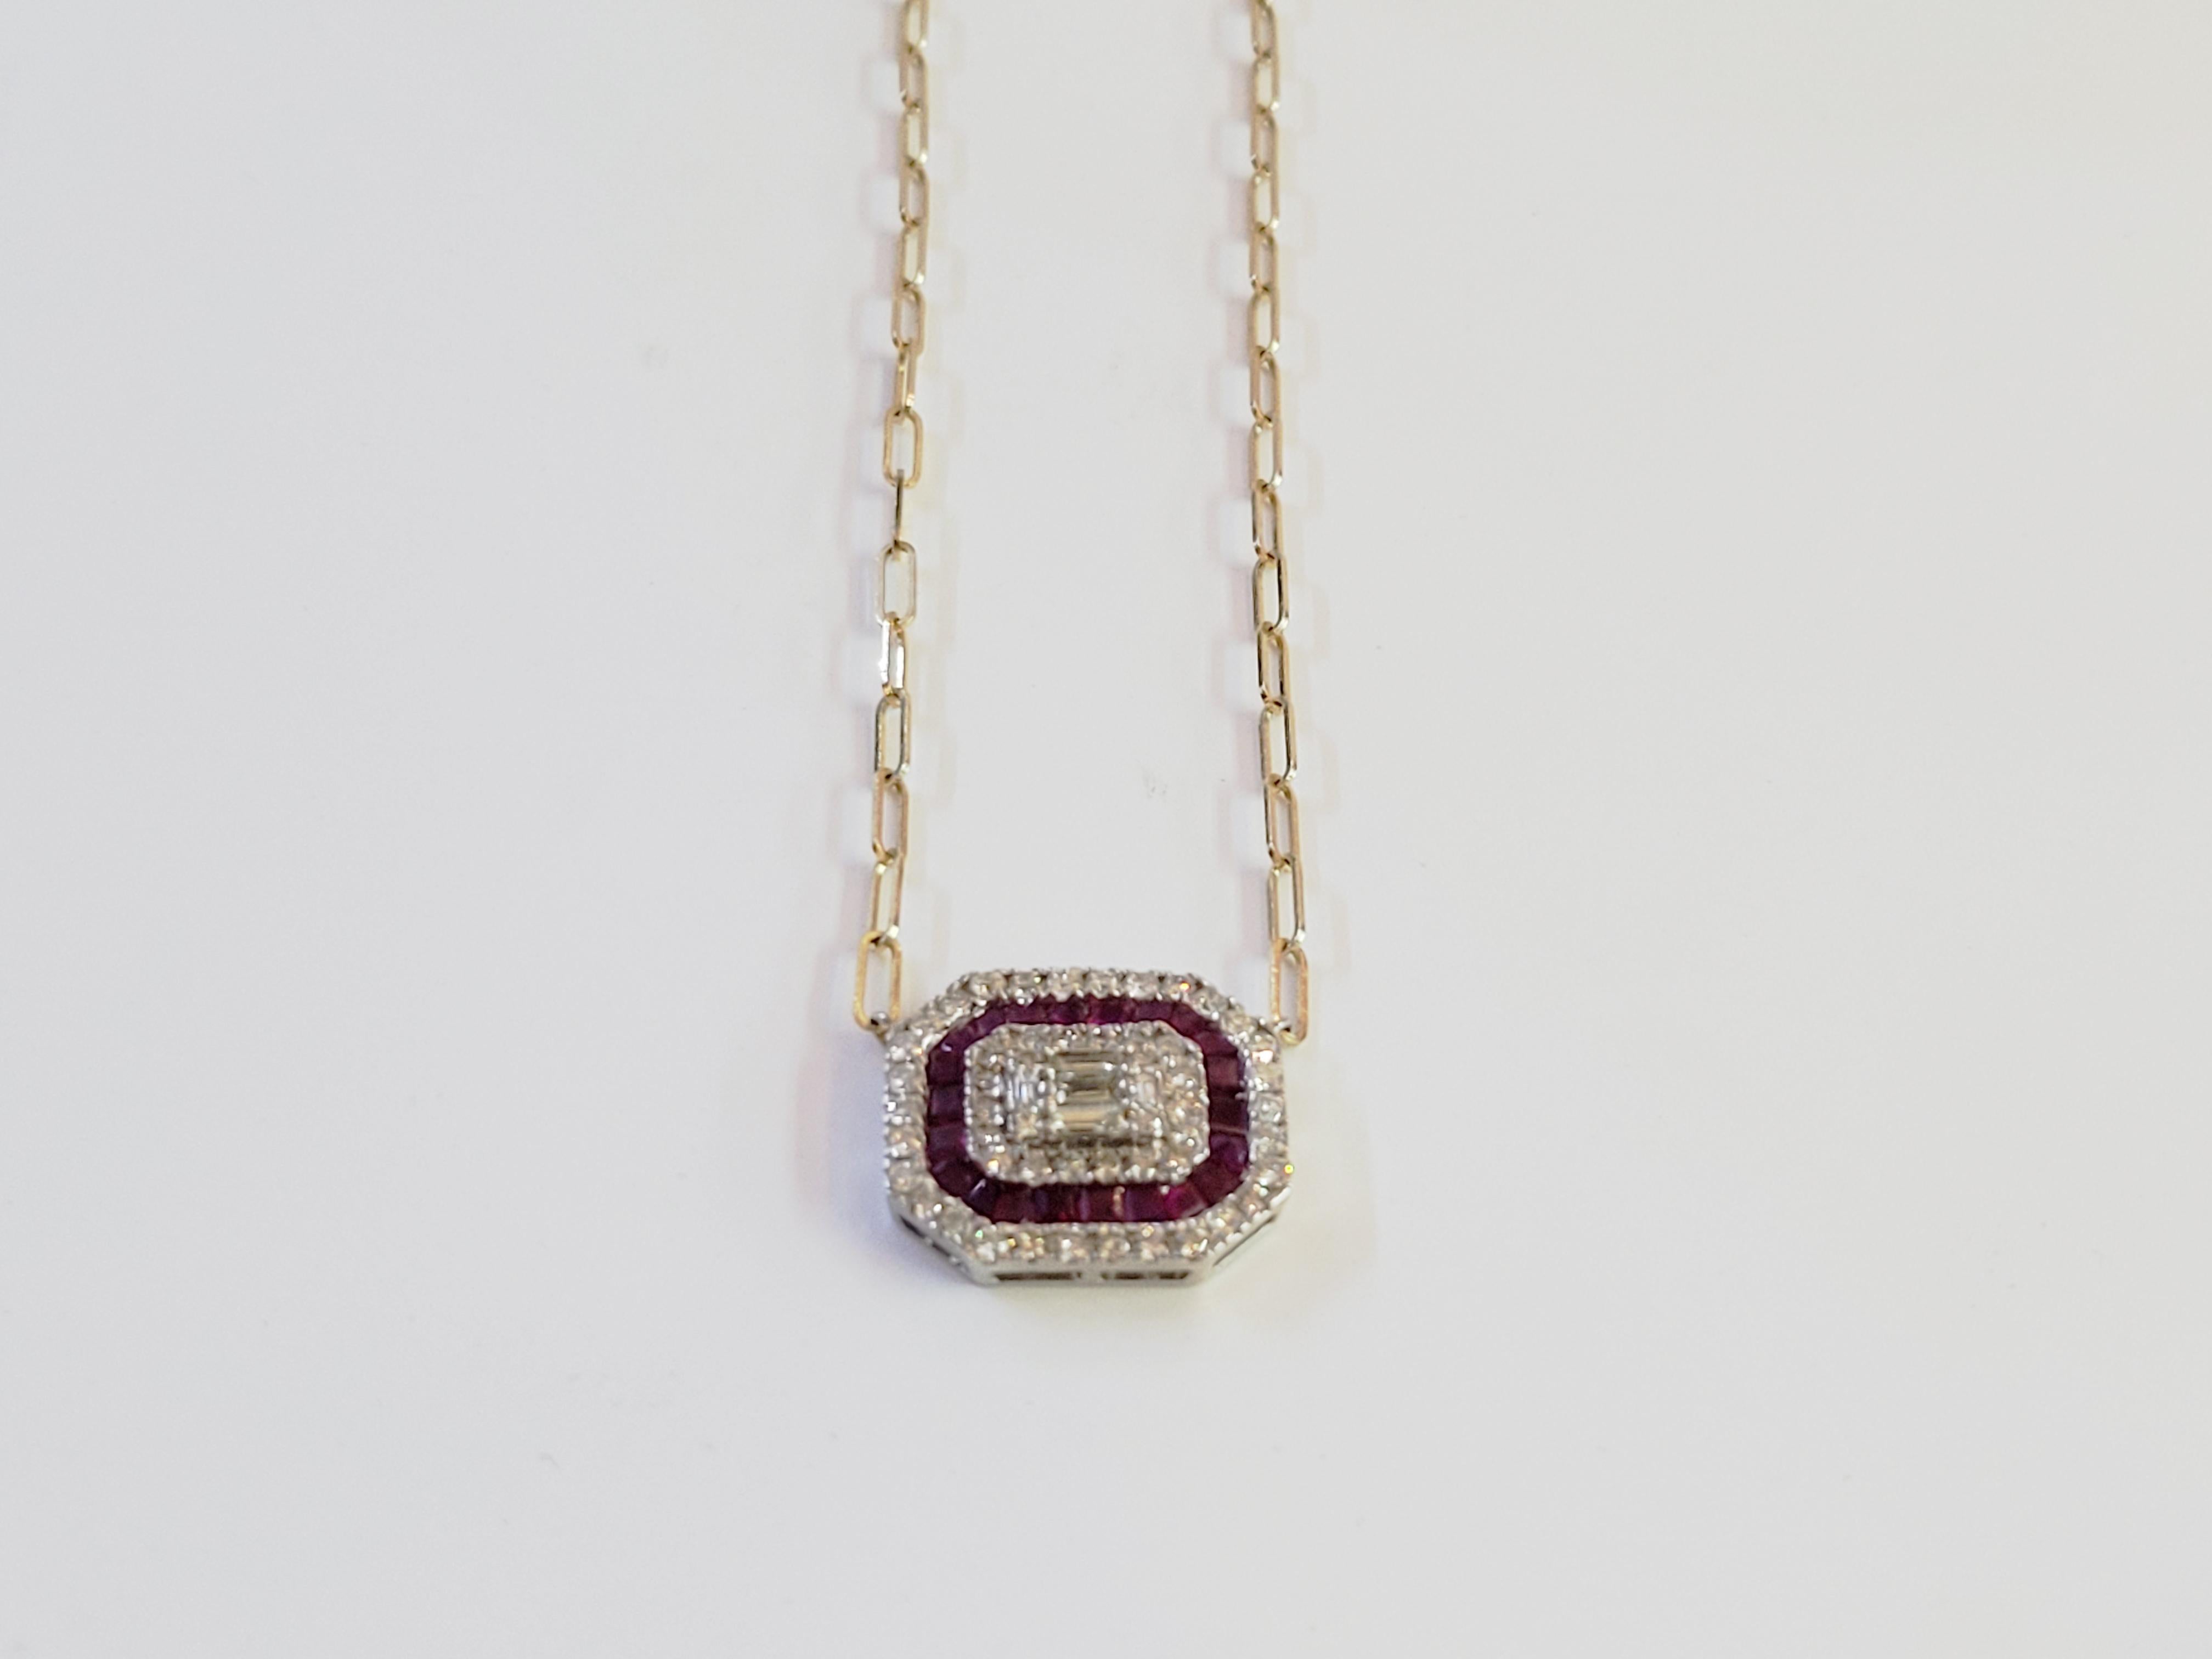 Paperclip chain Diamond and Ruby Necklace 
Mint condition
14K Yellow and White gold
Diamond and Ruby
Chain 16